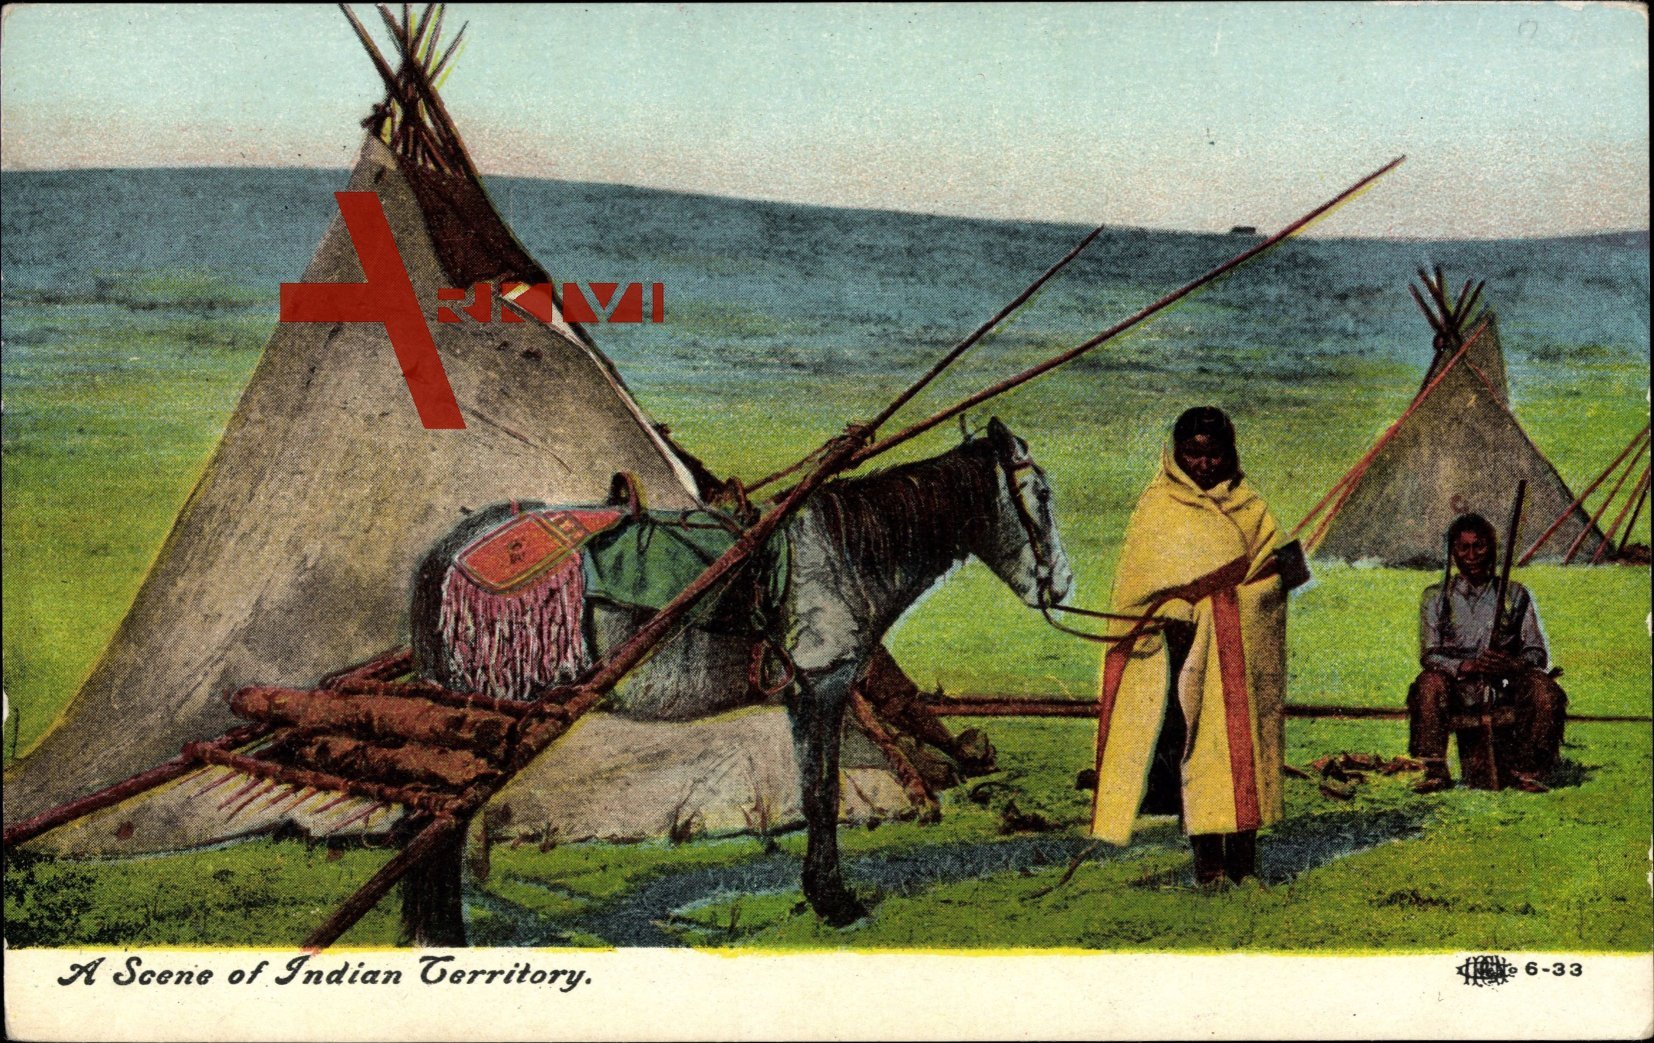 USA, Indianer, A Scene of Indian Territory, Tents, Horse